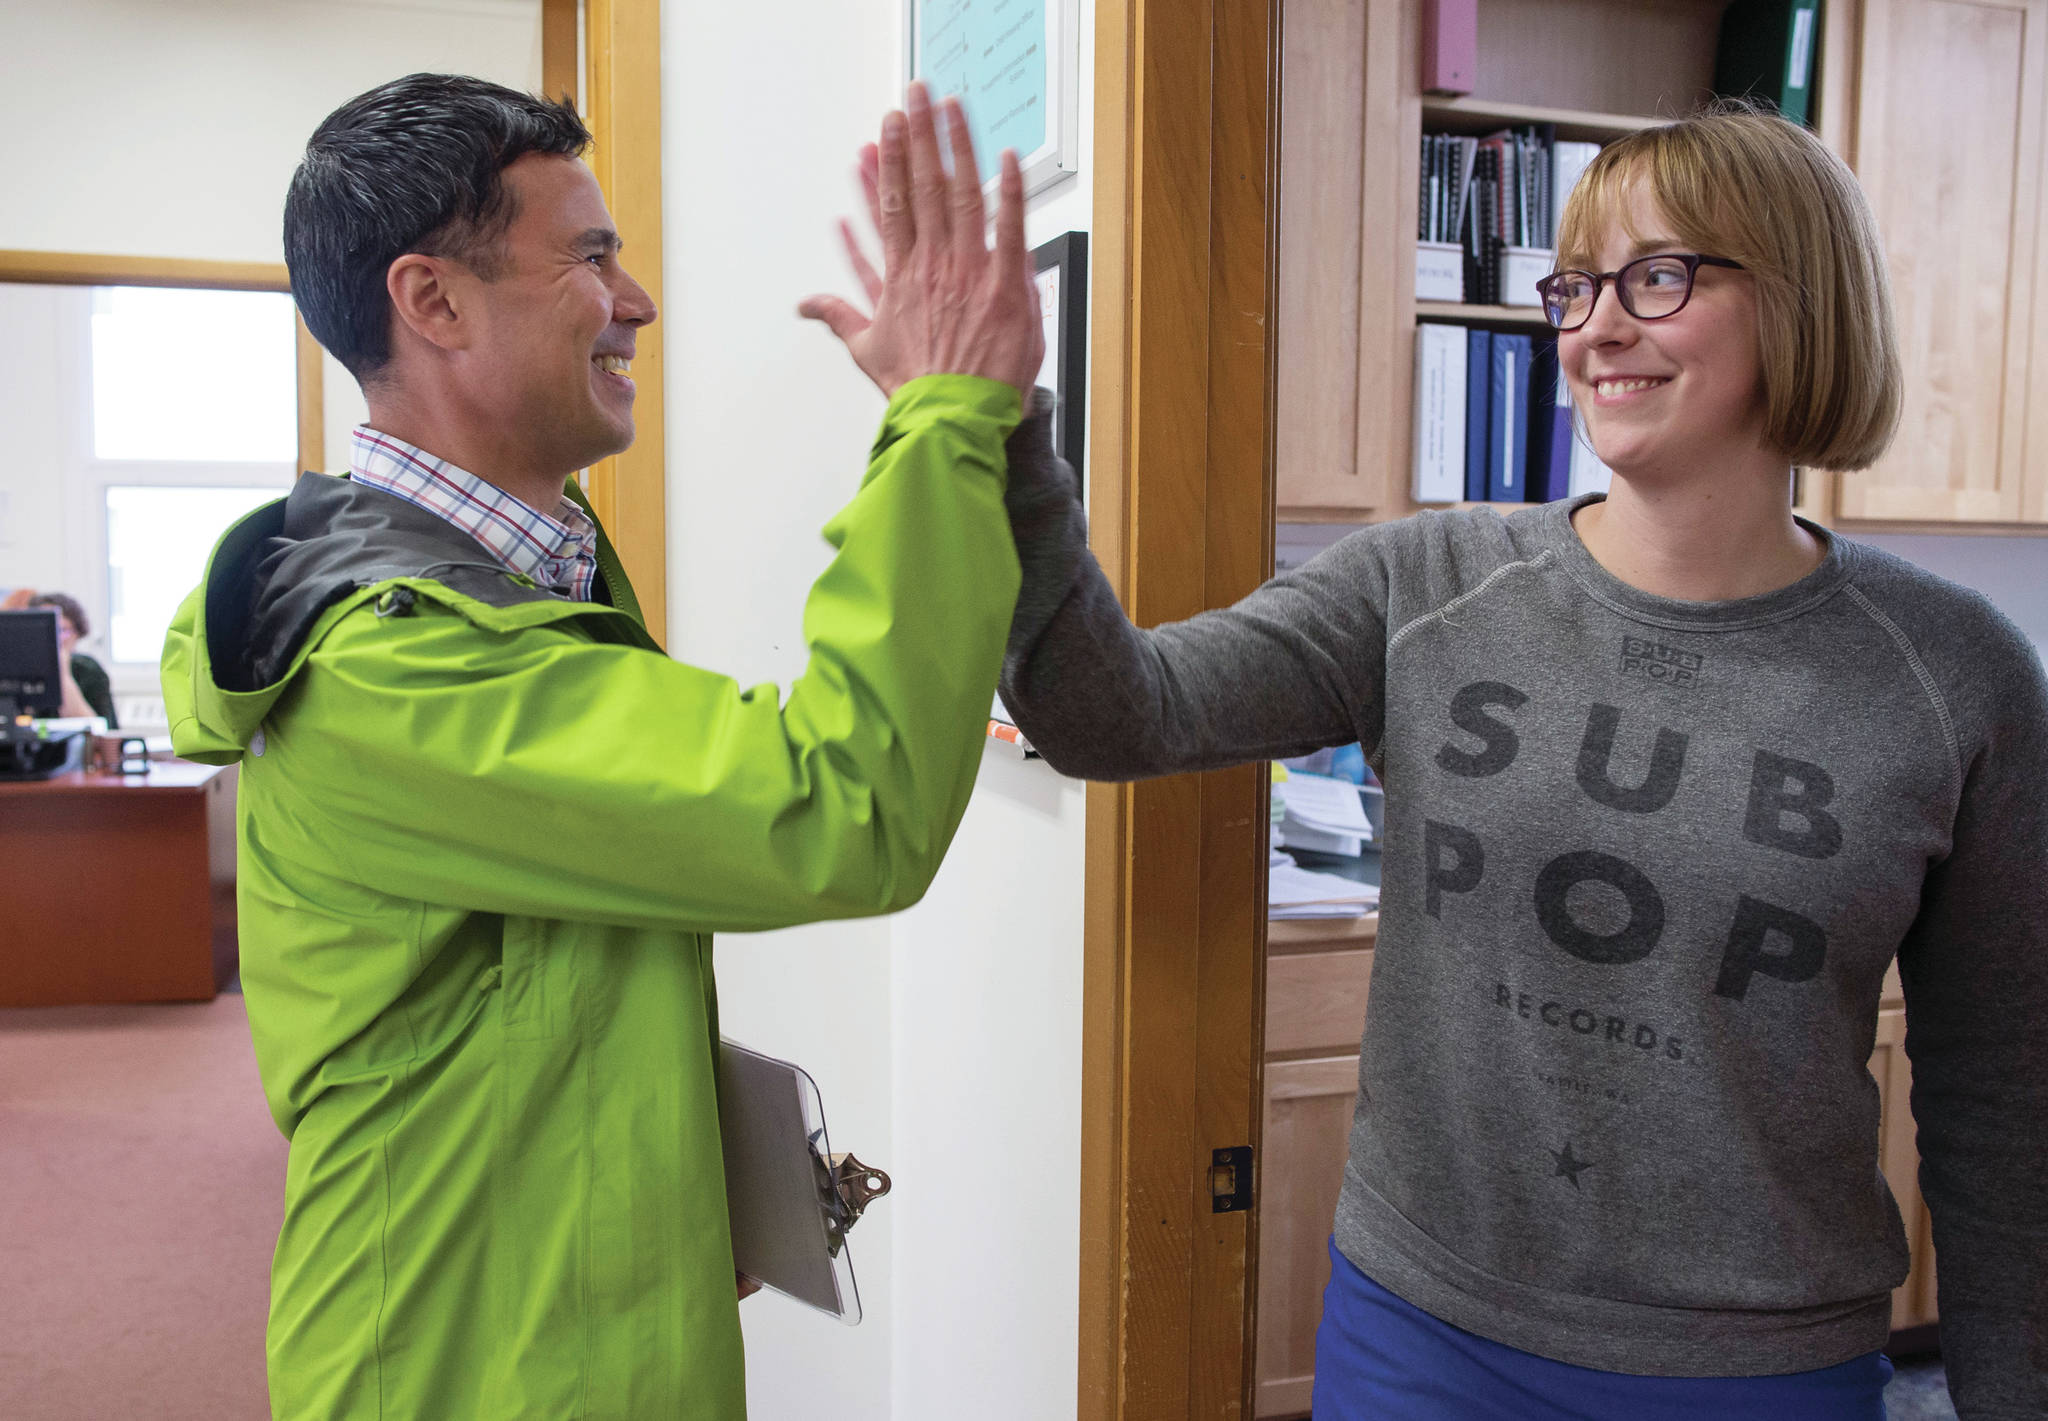 Norton Gregory gives Carole Triem a high-five as he arrives at City Hall to resign from his Assembly seat to run for mayor on Monday, August 13, 2018. Triem was waiting for Gregory to resign so she could file to run for his areawide seat. The Candidate Filing Period for the Oct. 2 Municipal Election closed Monday. (Michael Penn | Juneau Empire)